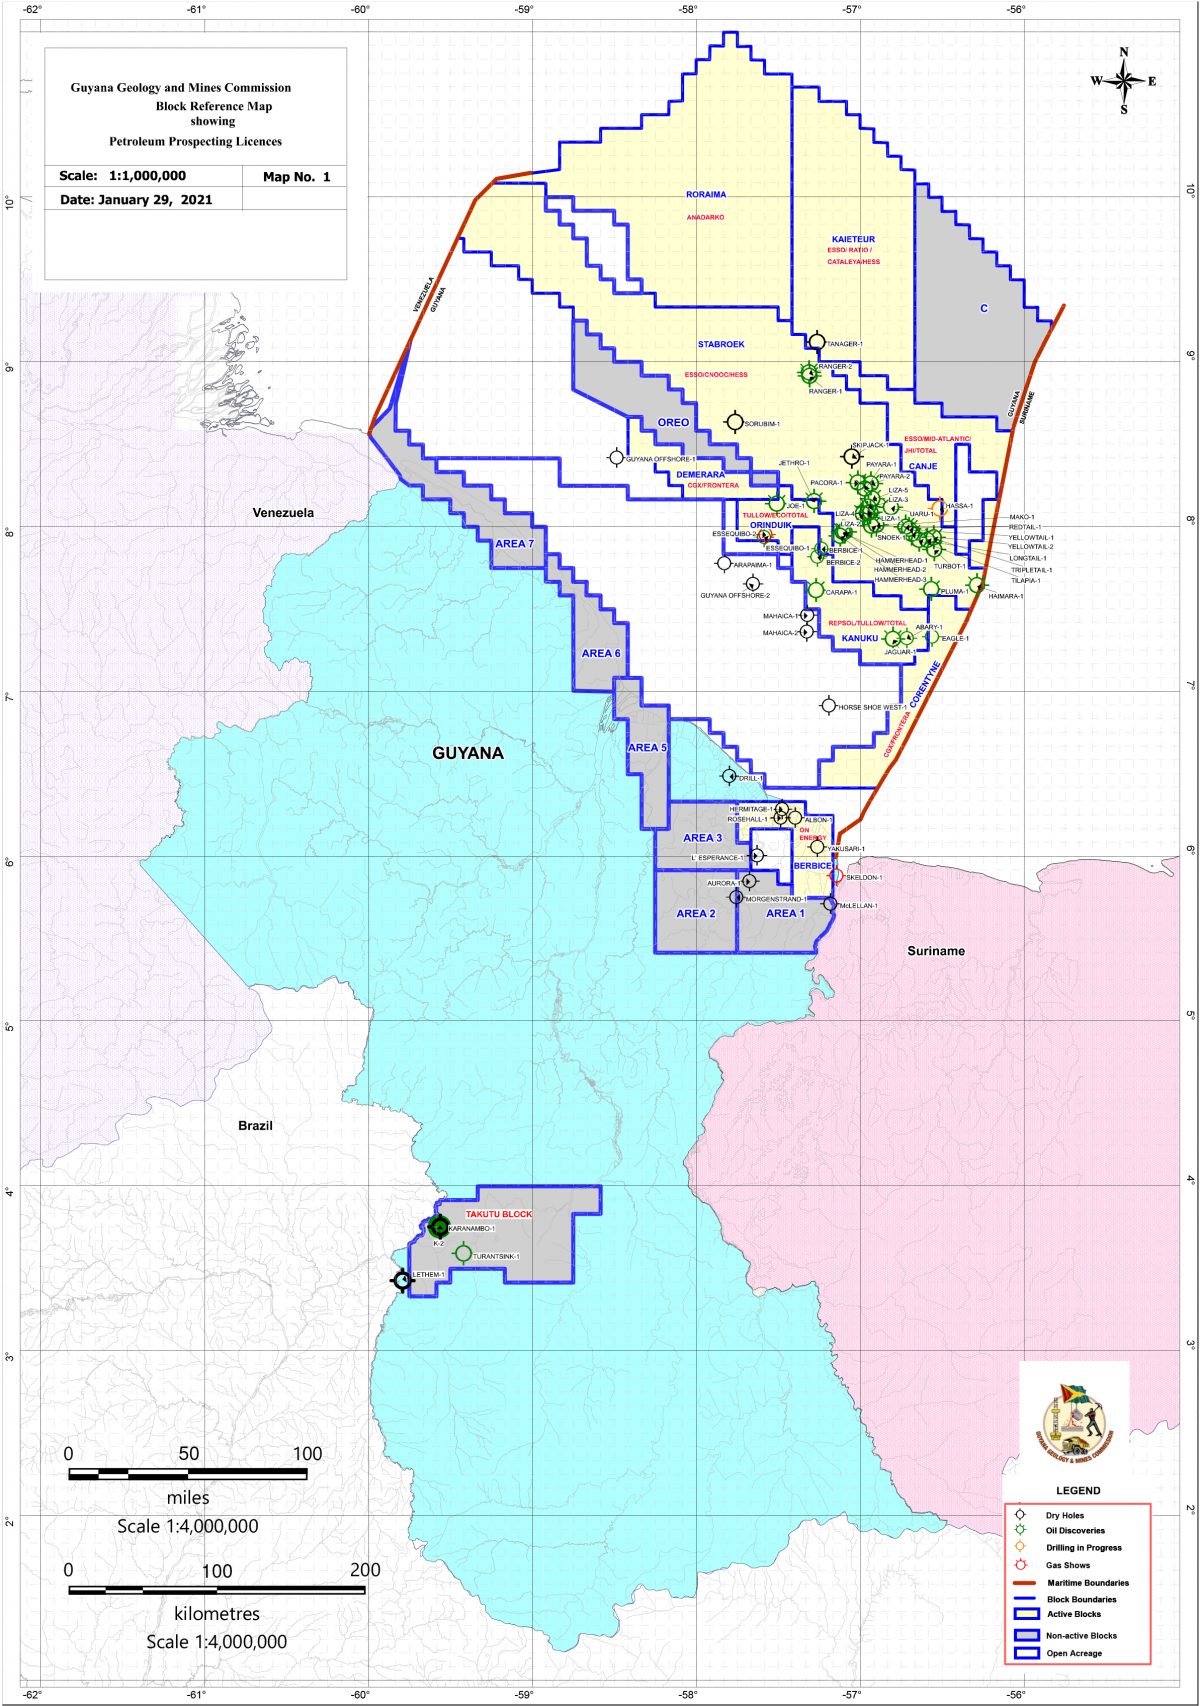 A Guyana Geology and Mines Commission map showing the offshore blocks  